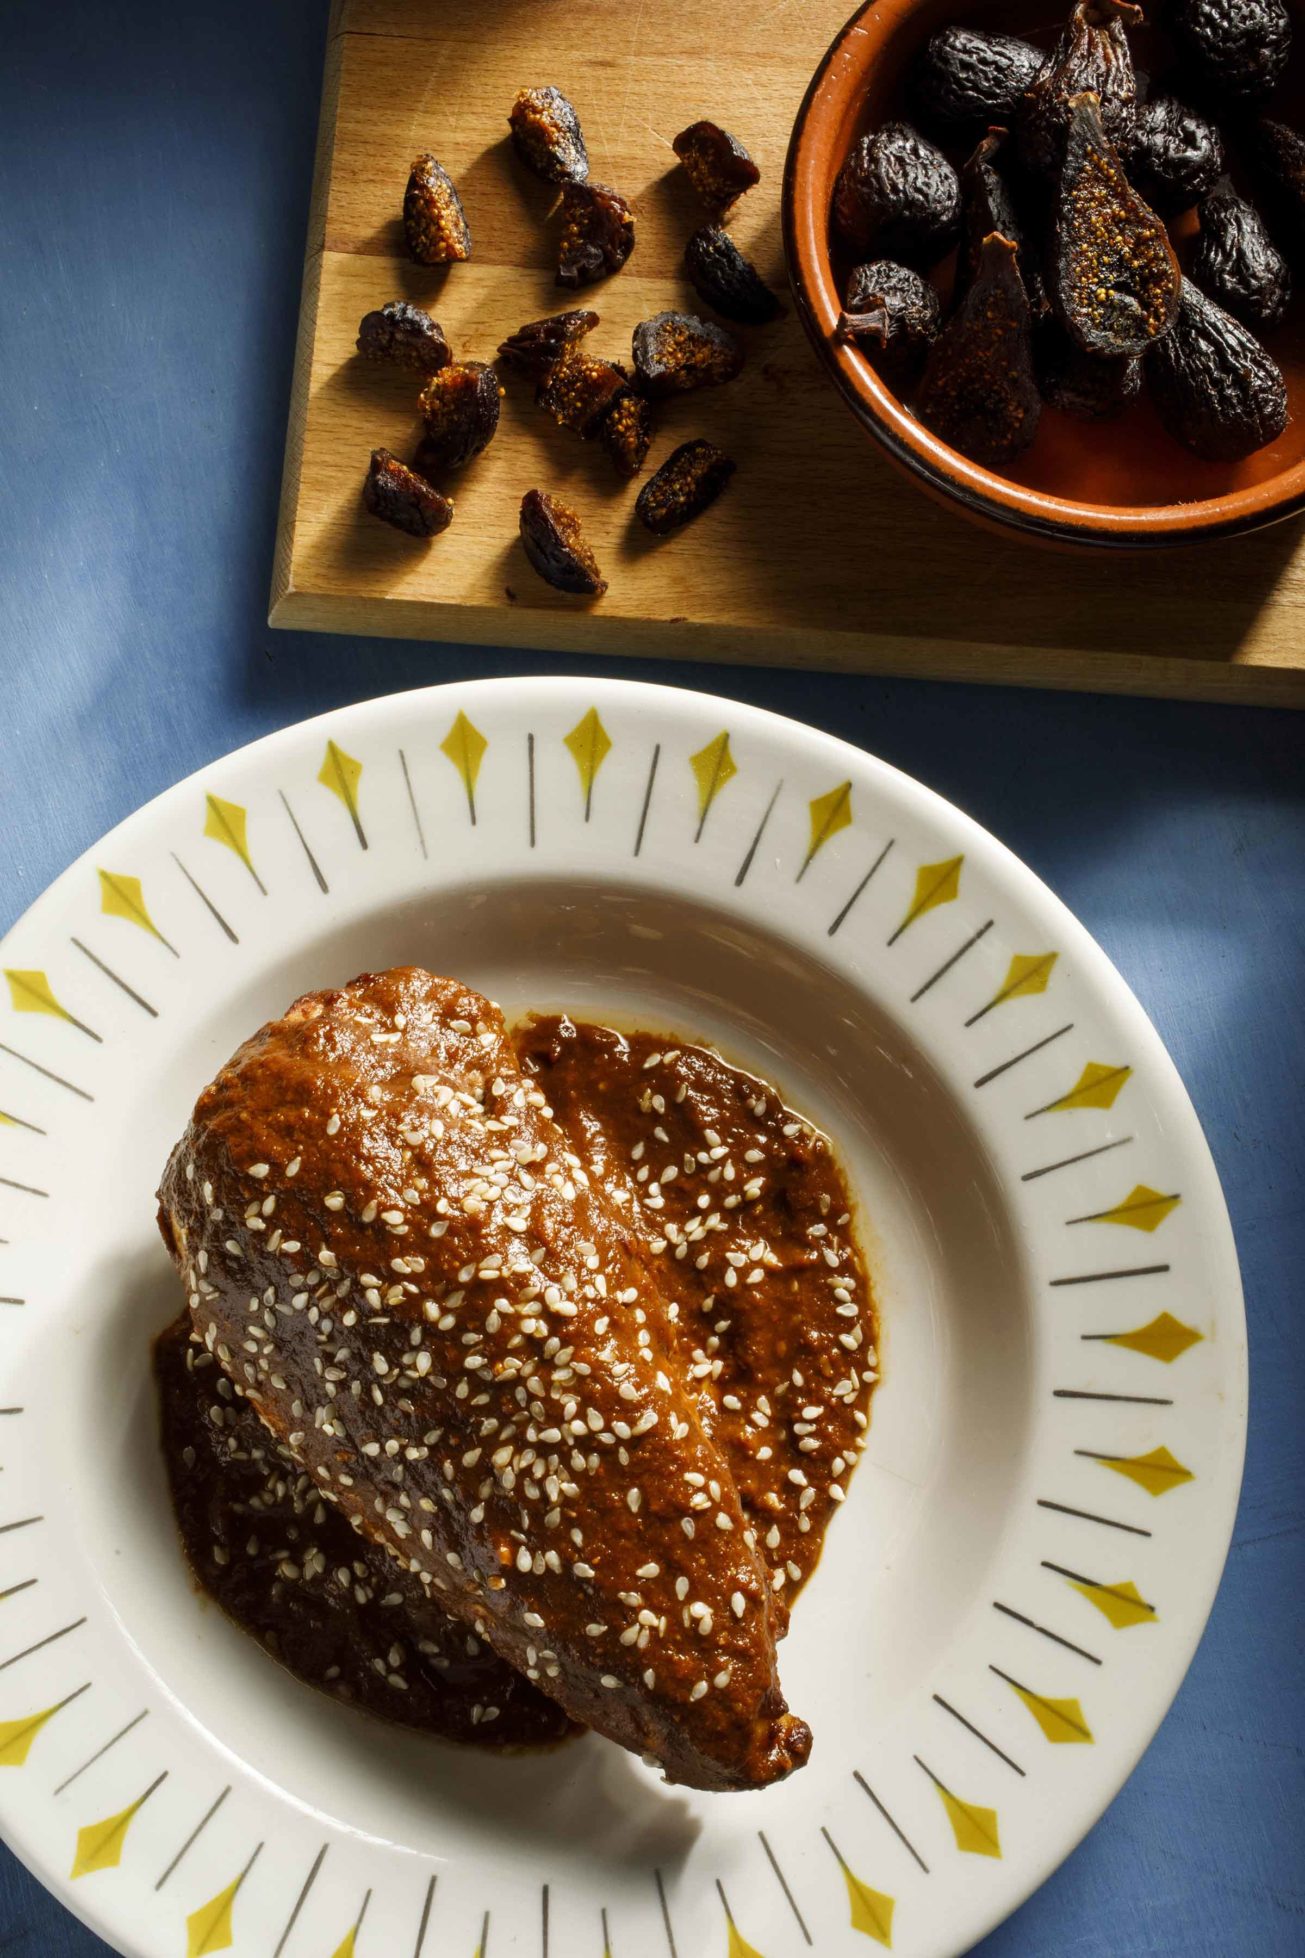 There are different kinds of mole sauce recipes. Try chicken in fig mole sauce for a twist on taste and see how the dried figs add texture too.